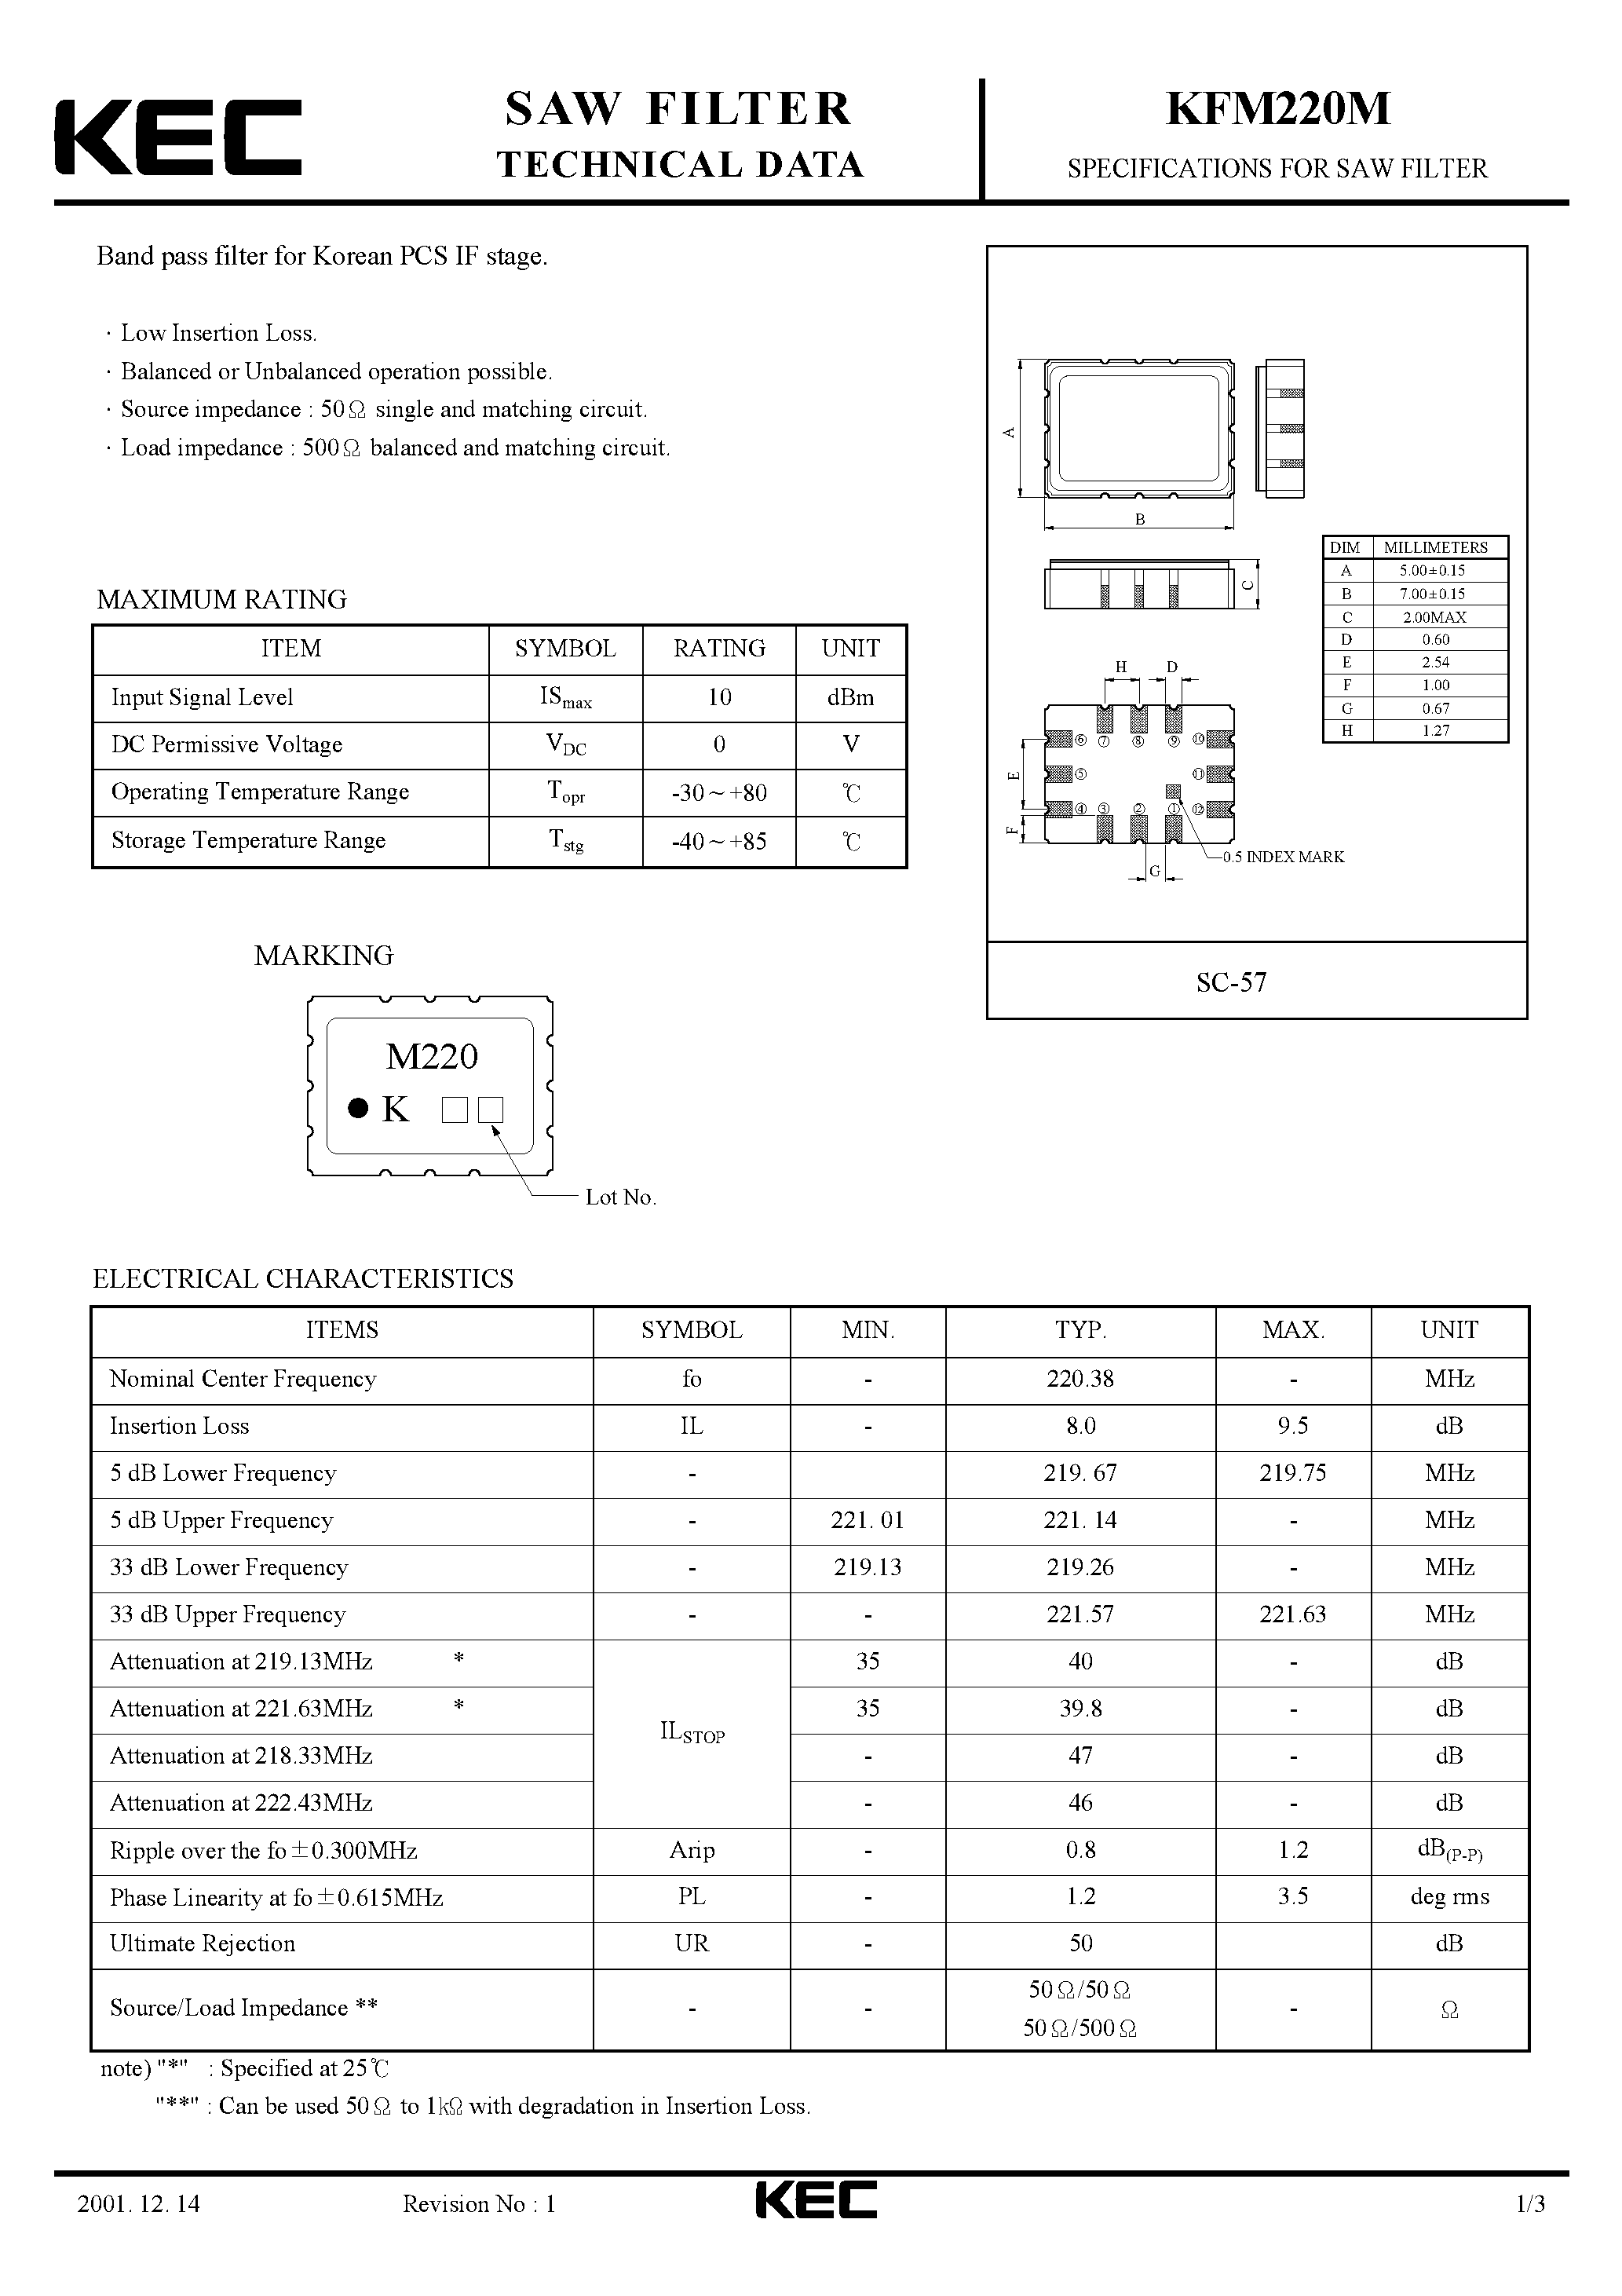 Datasheet KFM220M - SPECIFICATIONS FOR SAW FILTER(BAND PASS FILTERS FOR KOREAN PCS IF STAGE) page 1